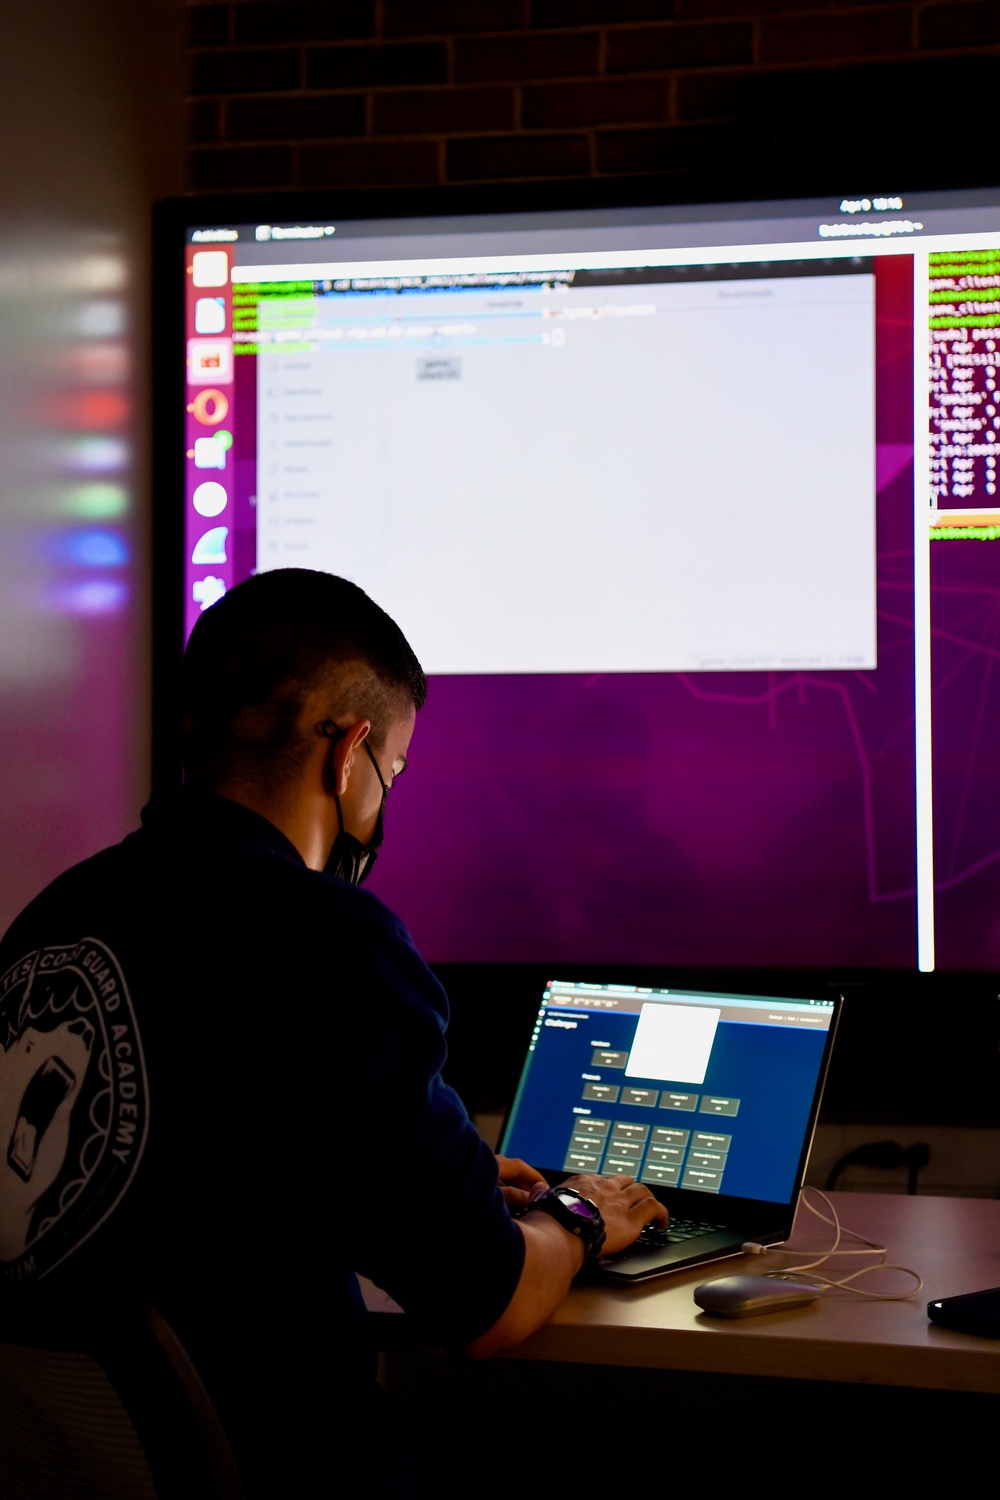 U.S. Coast Guard Academy Participates in NSA Cyber Exercise 2021 